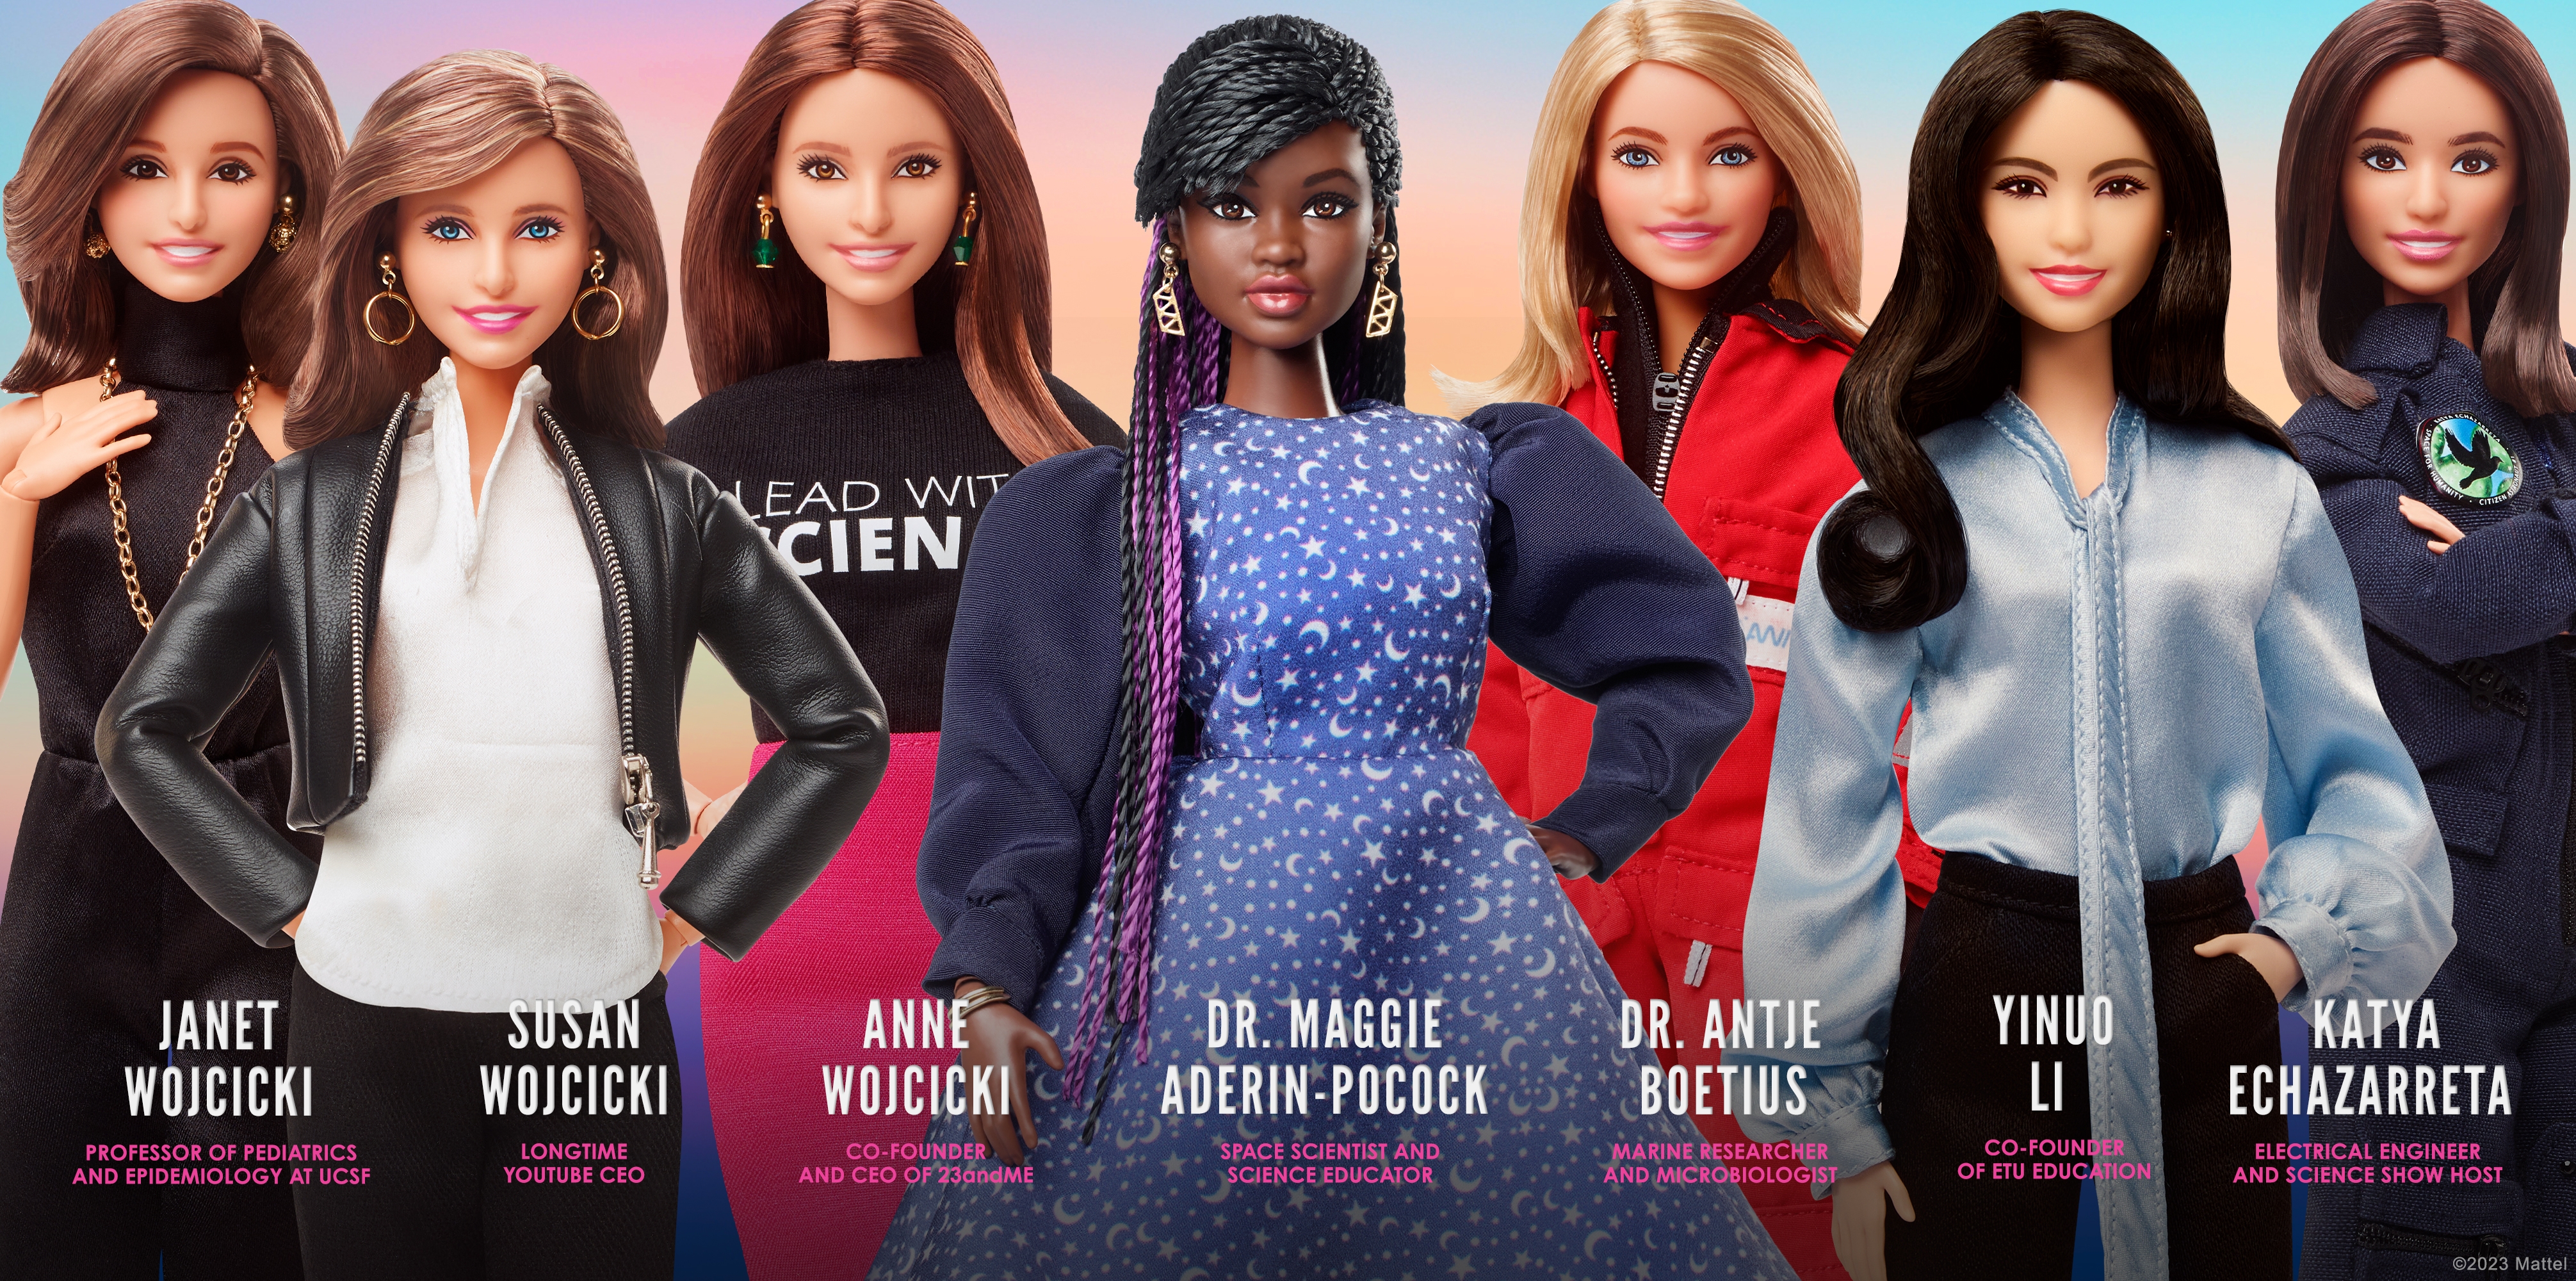 Iconic Barbie fashion comes alive in vintage collaboration